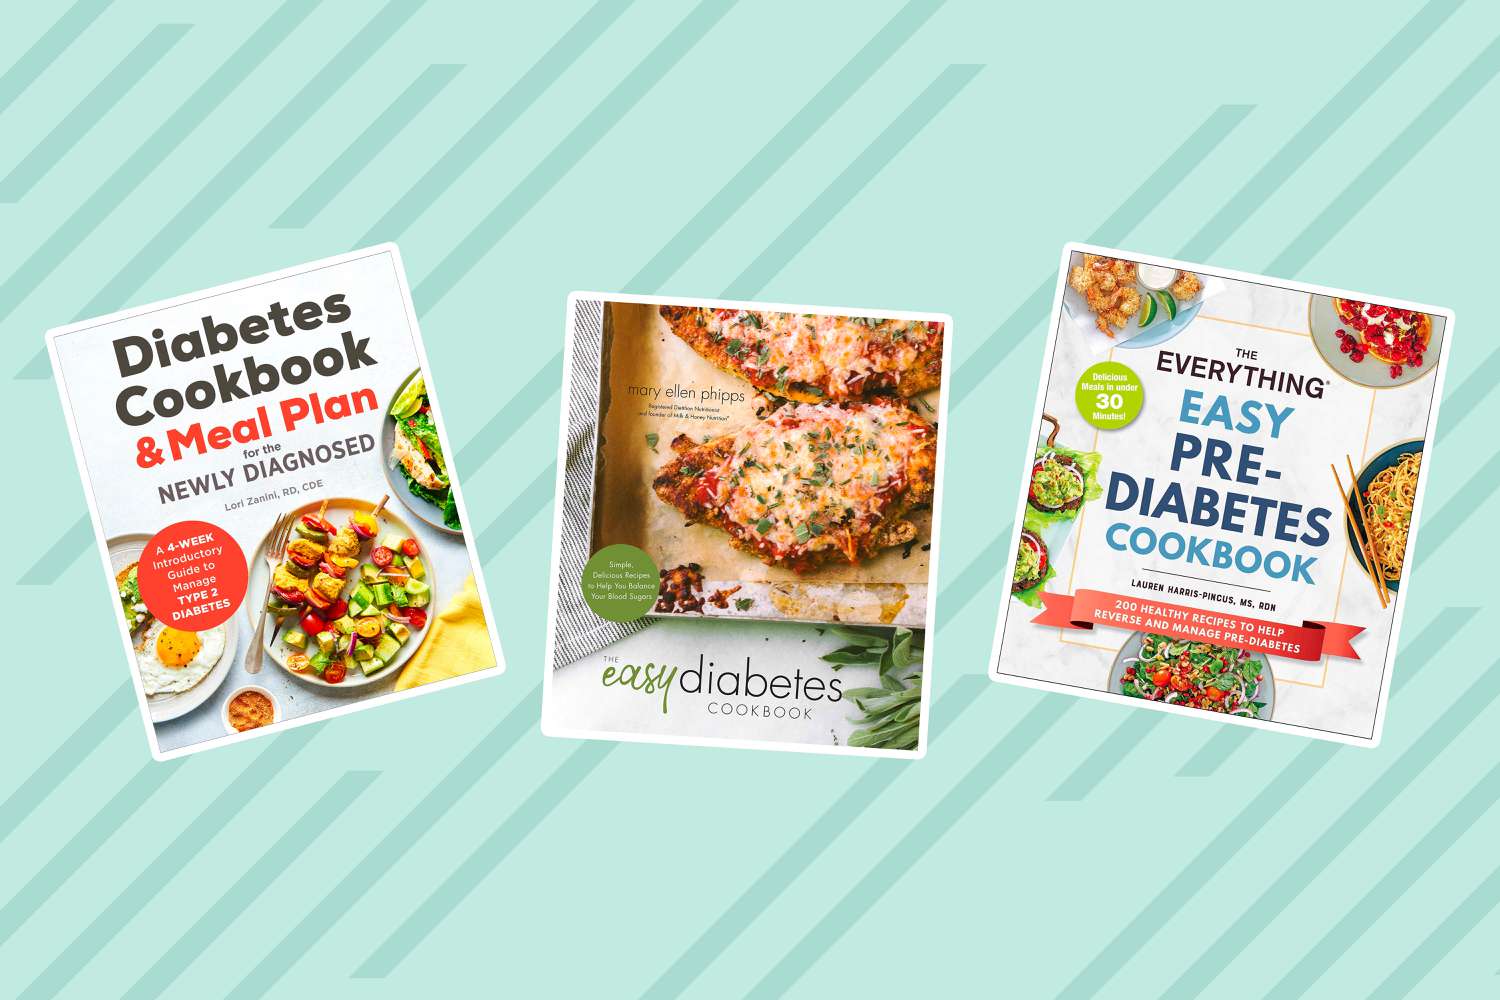 Collage of cookbooks we recommend for diabetes on a blue background